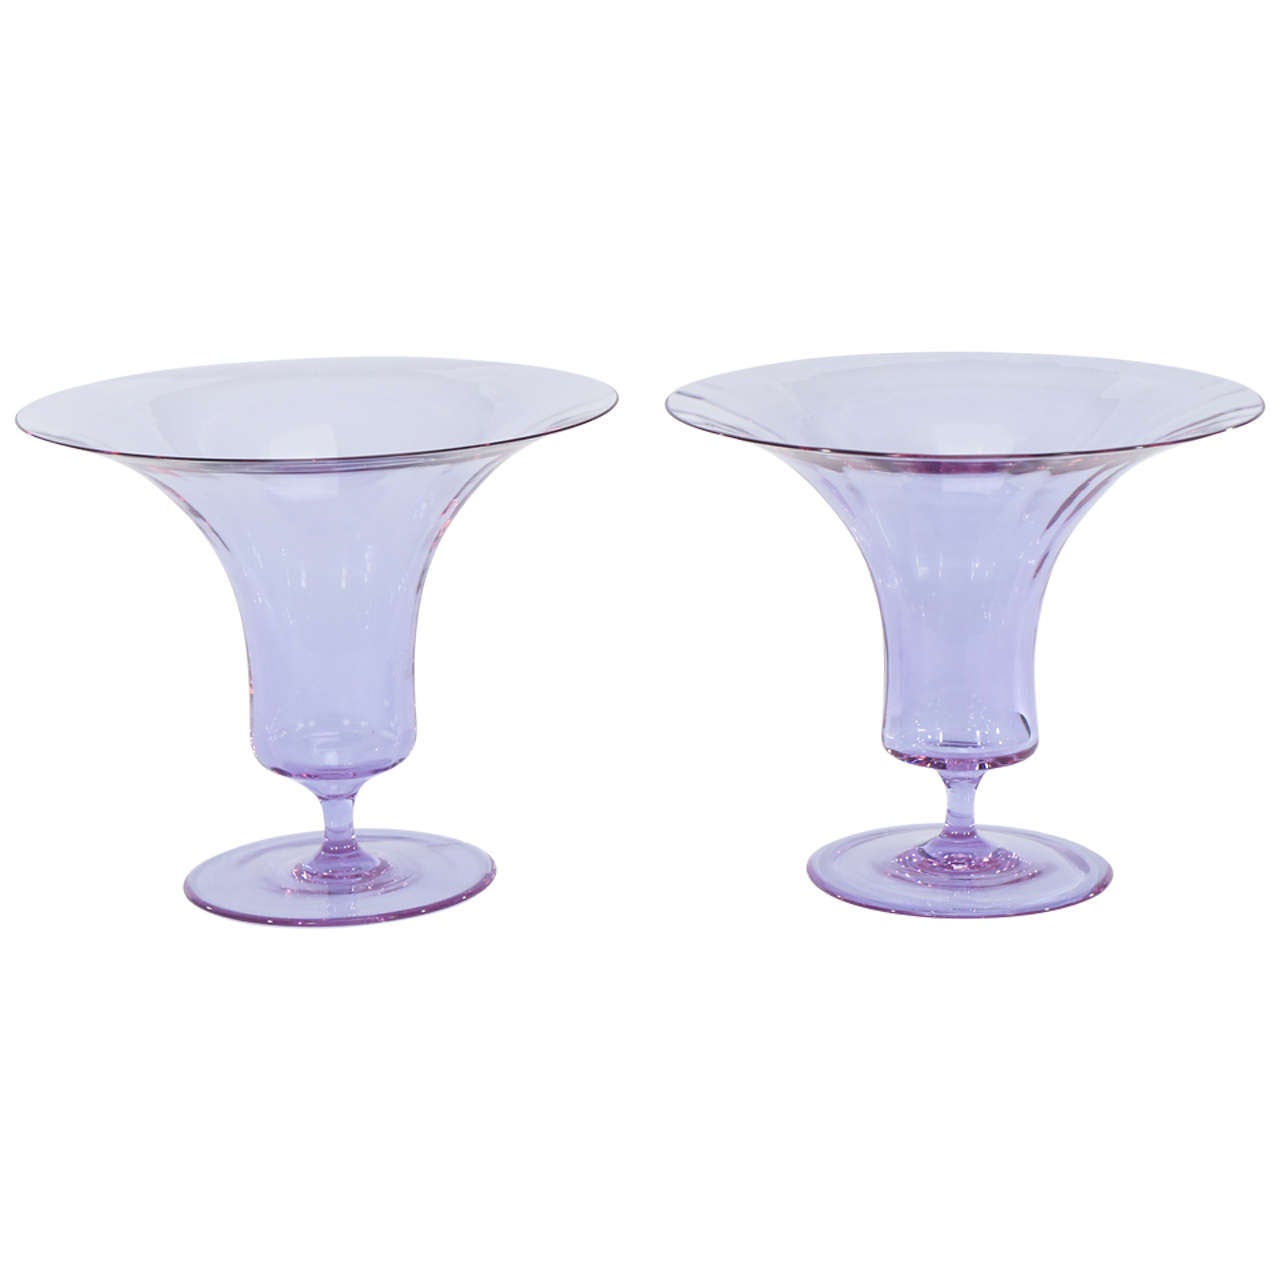 Pair of Signed Moser "Alexandrite" Vases or Centerpieces For Sale